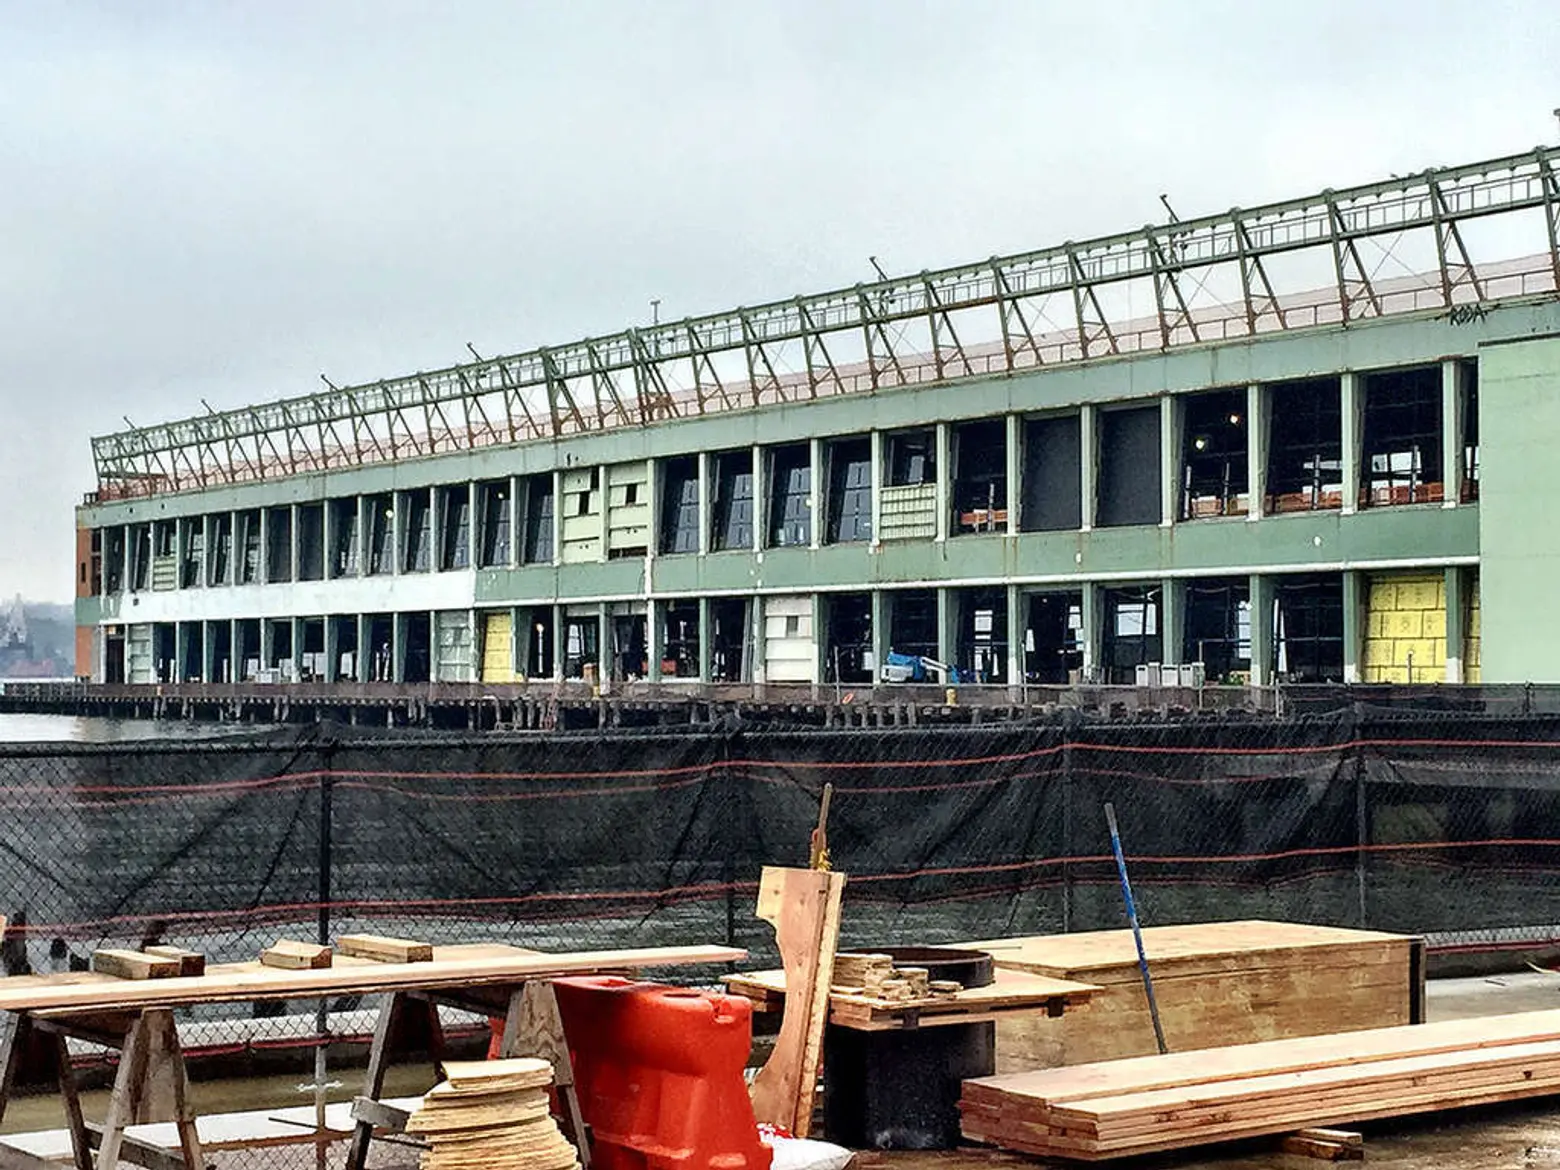 Construction update: Google’s Pier 57 expansion gets glassed